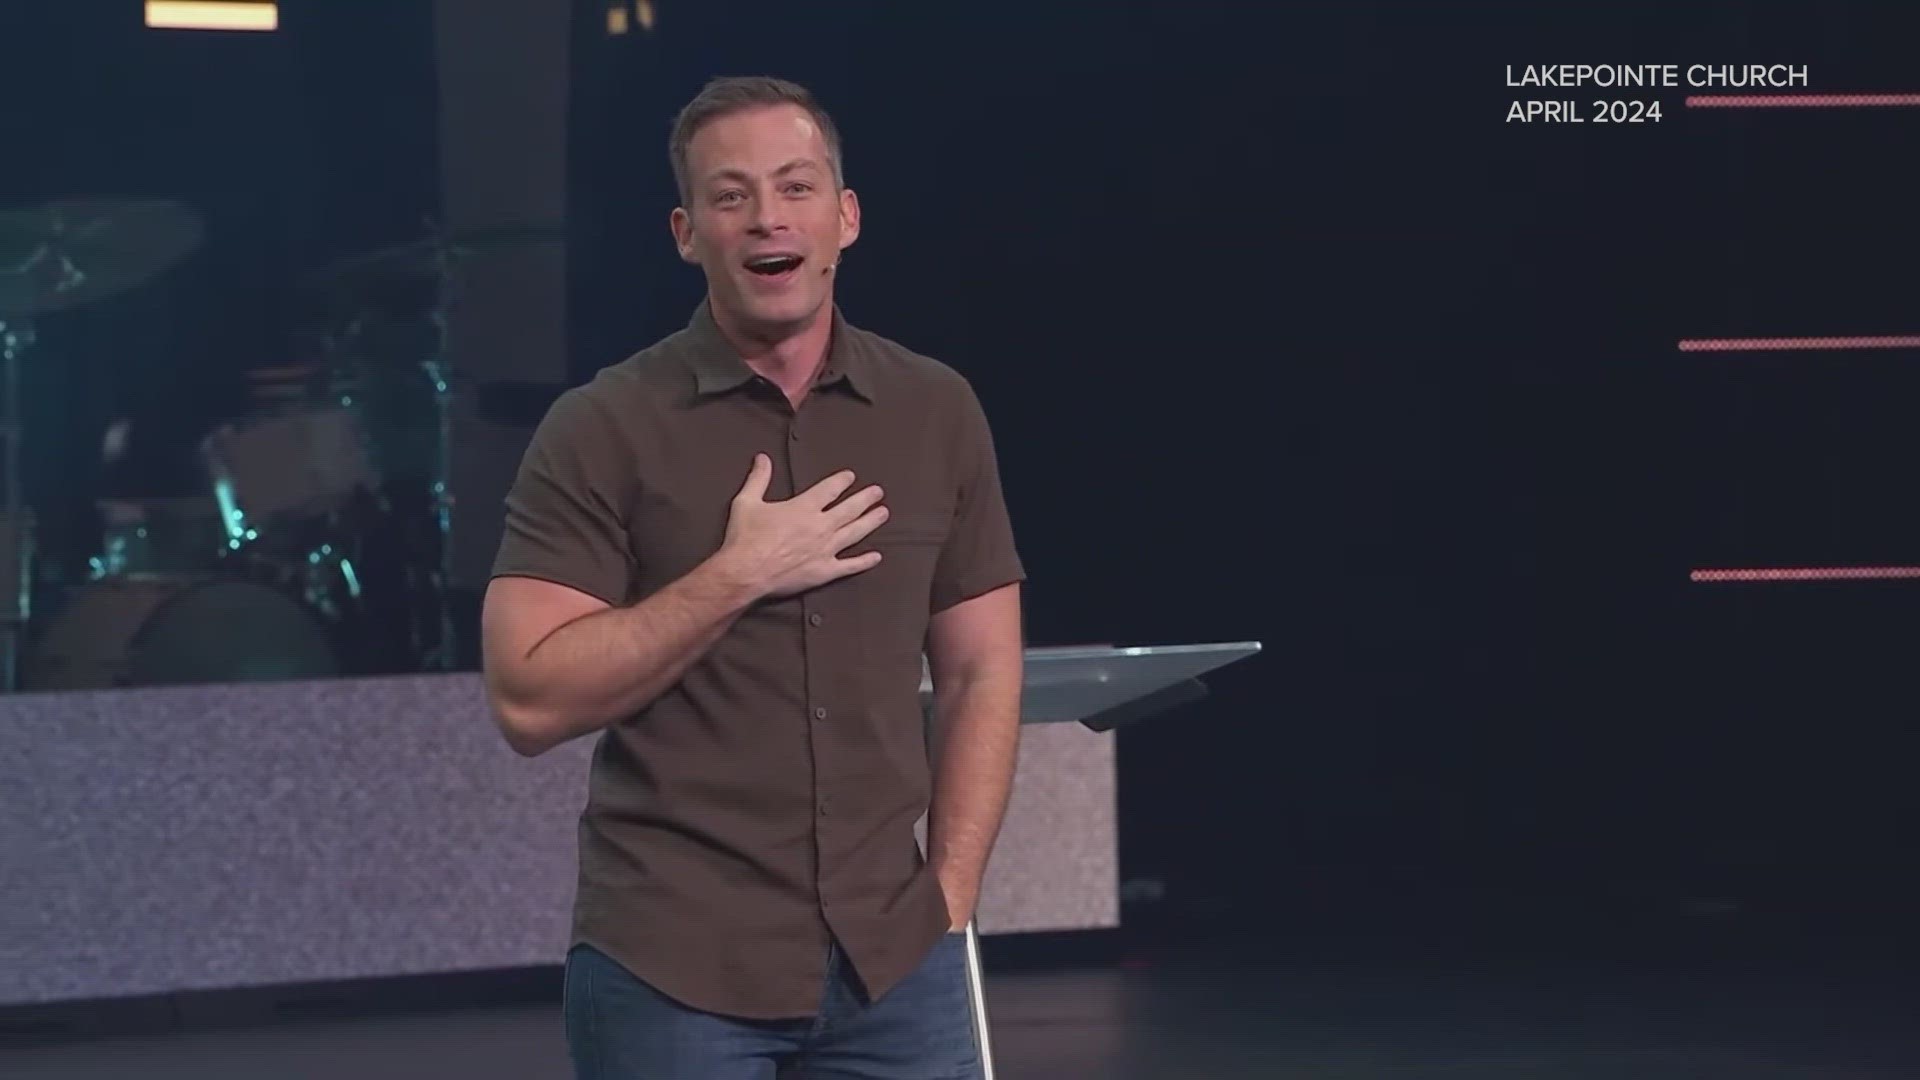 The senior pastor of LakePointe Church in Rockwall faced criticism following a anecdote about how wives should behave toward their husbands on their wedding night.